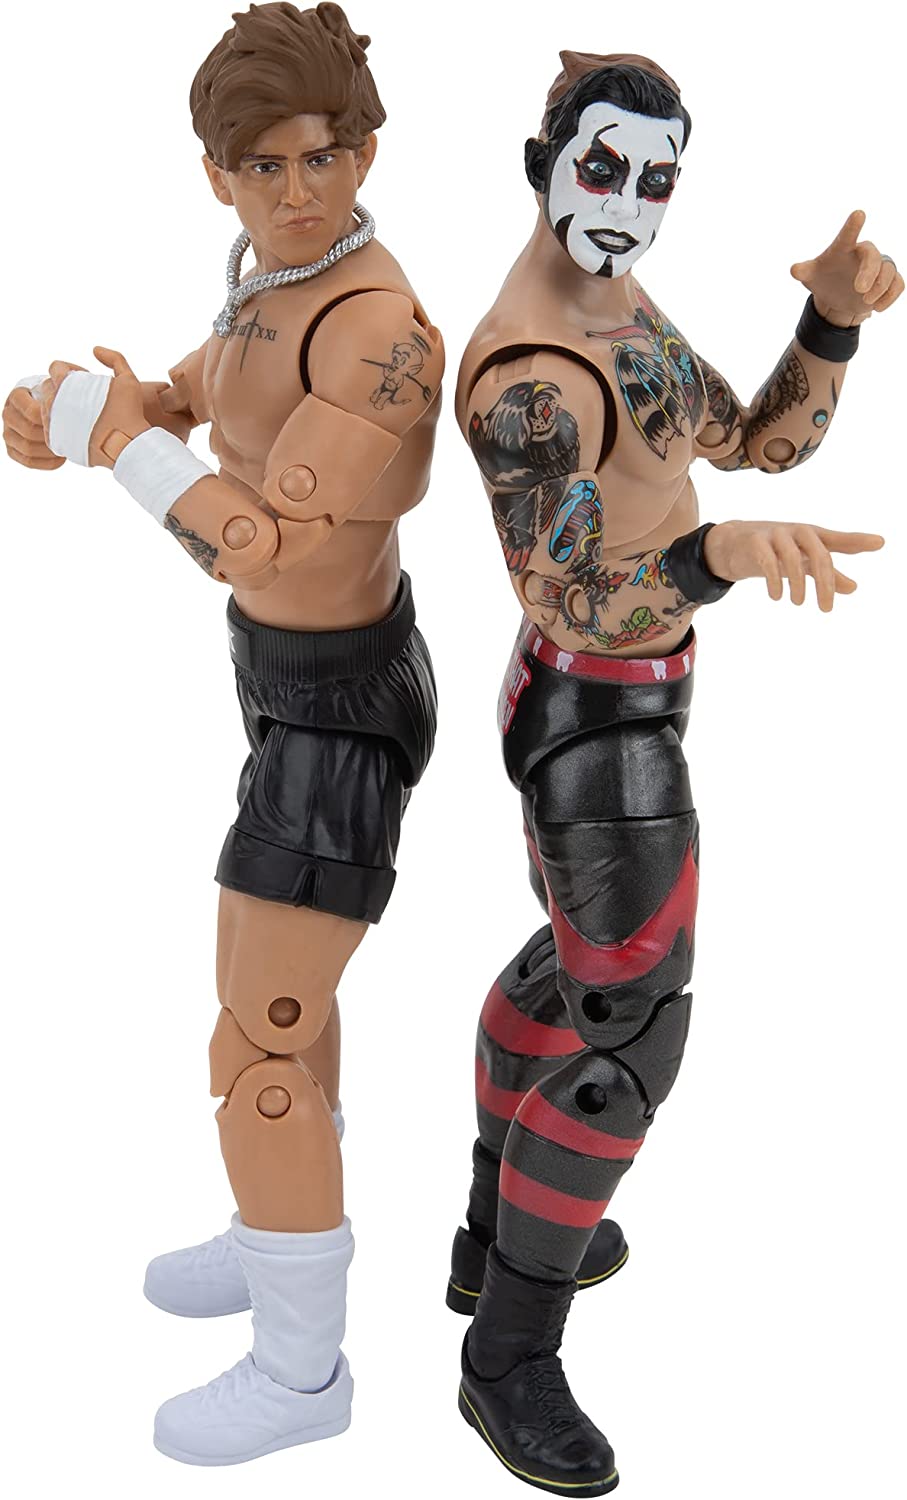 2023 AEW Jazwares Unrivaled Collection Amazon Exclusive Hook & Danhausen Tag Team Pack